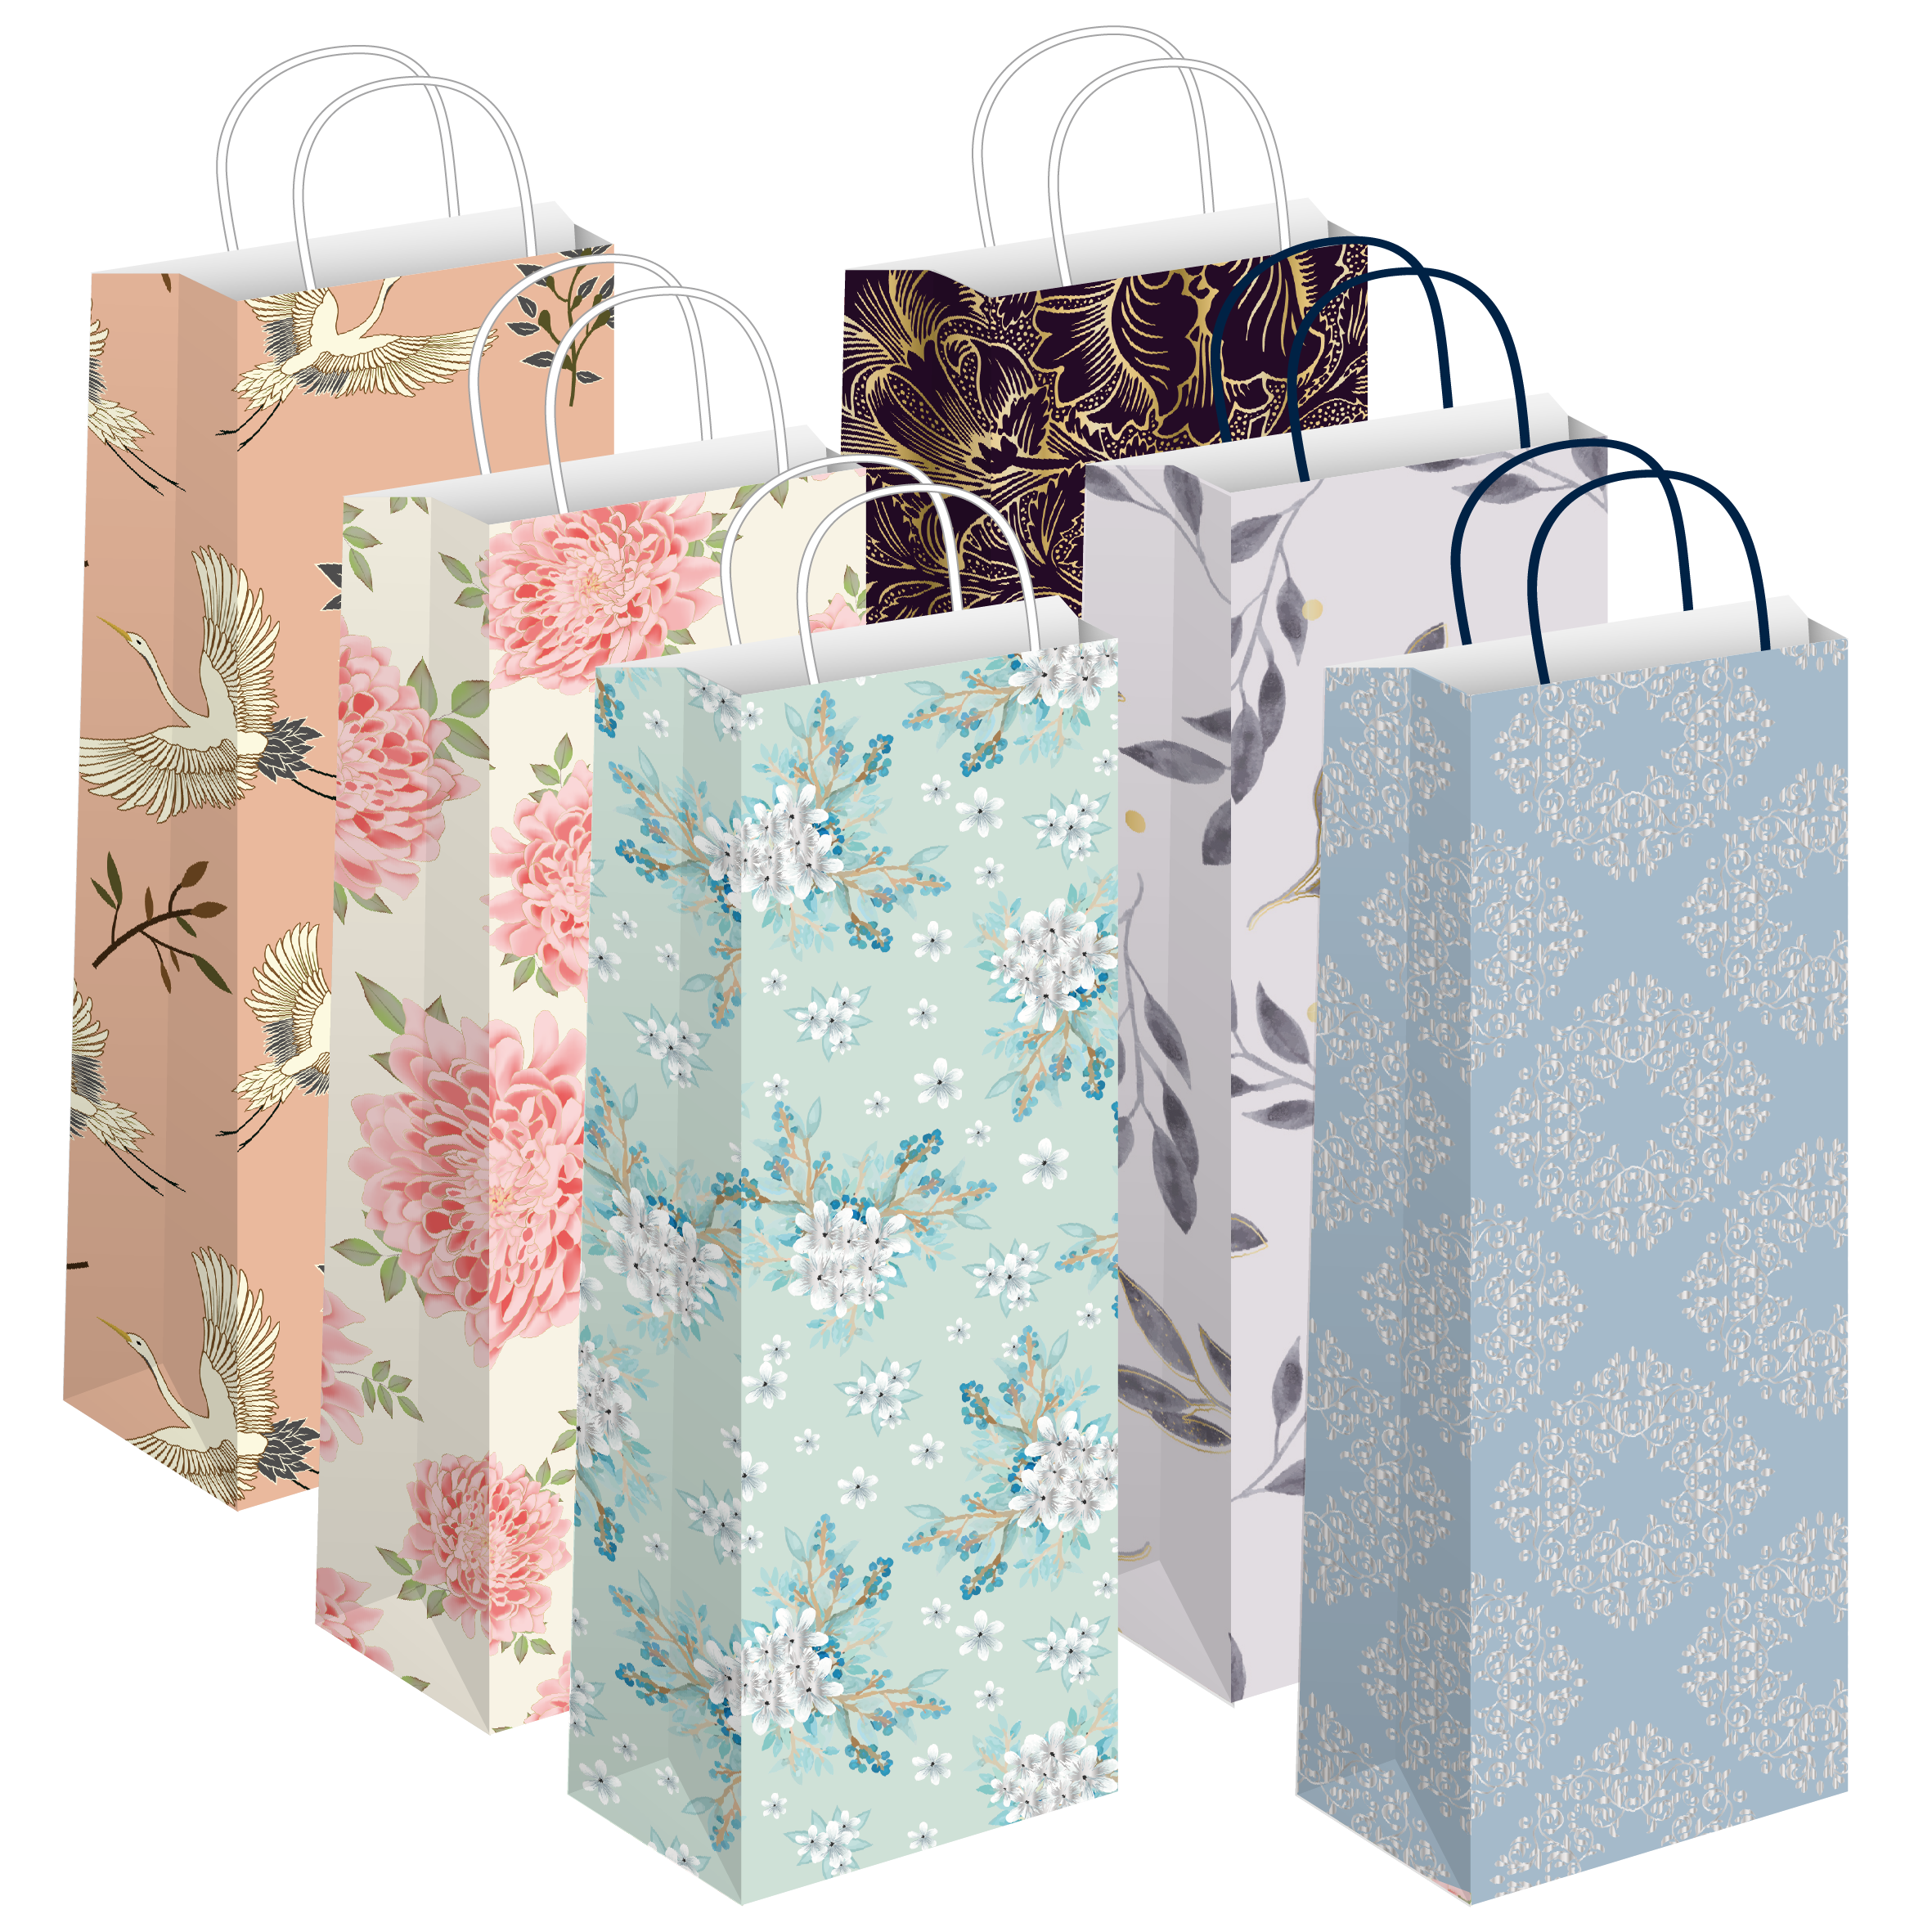 6 1/2  Craft bags, Gift bags, Paper gift bags